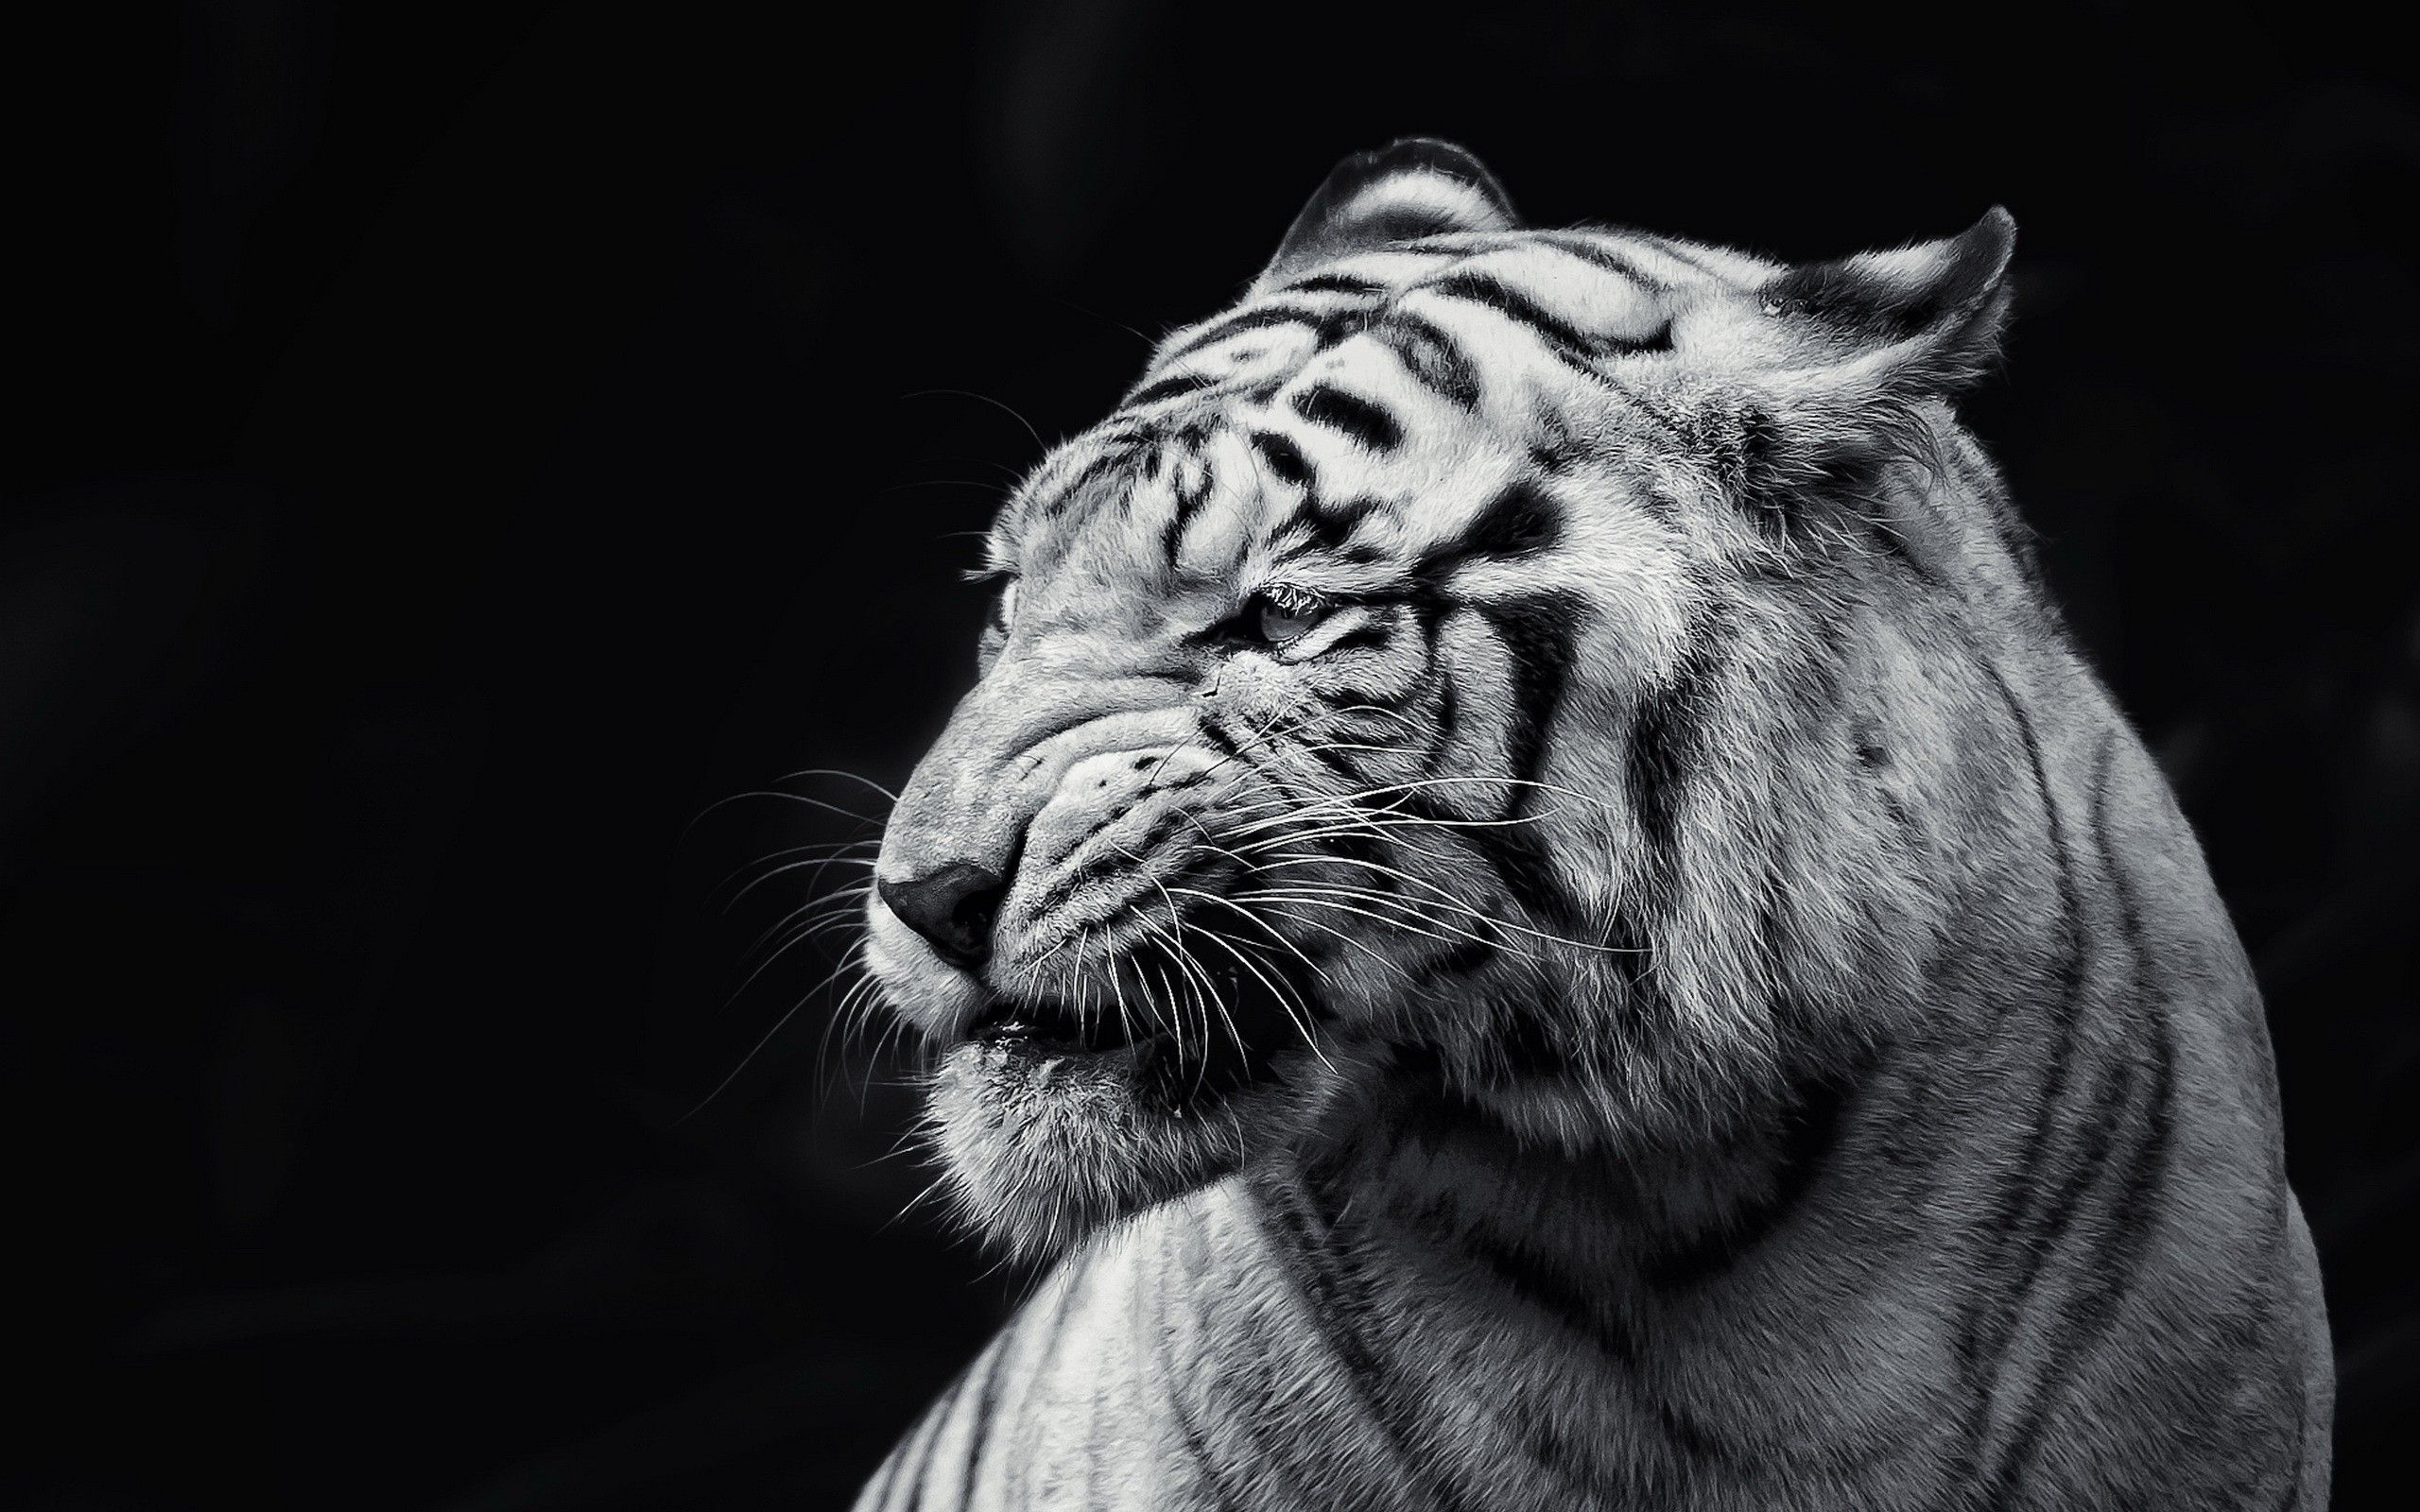 Black and White Tiger Wallpaper Free Black and White Tiger Background